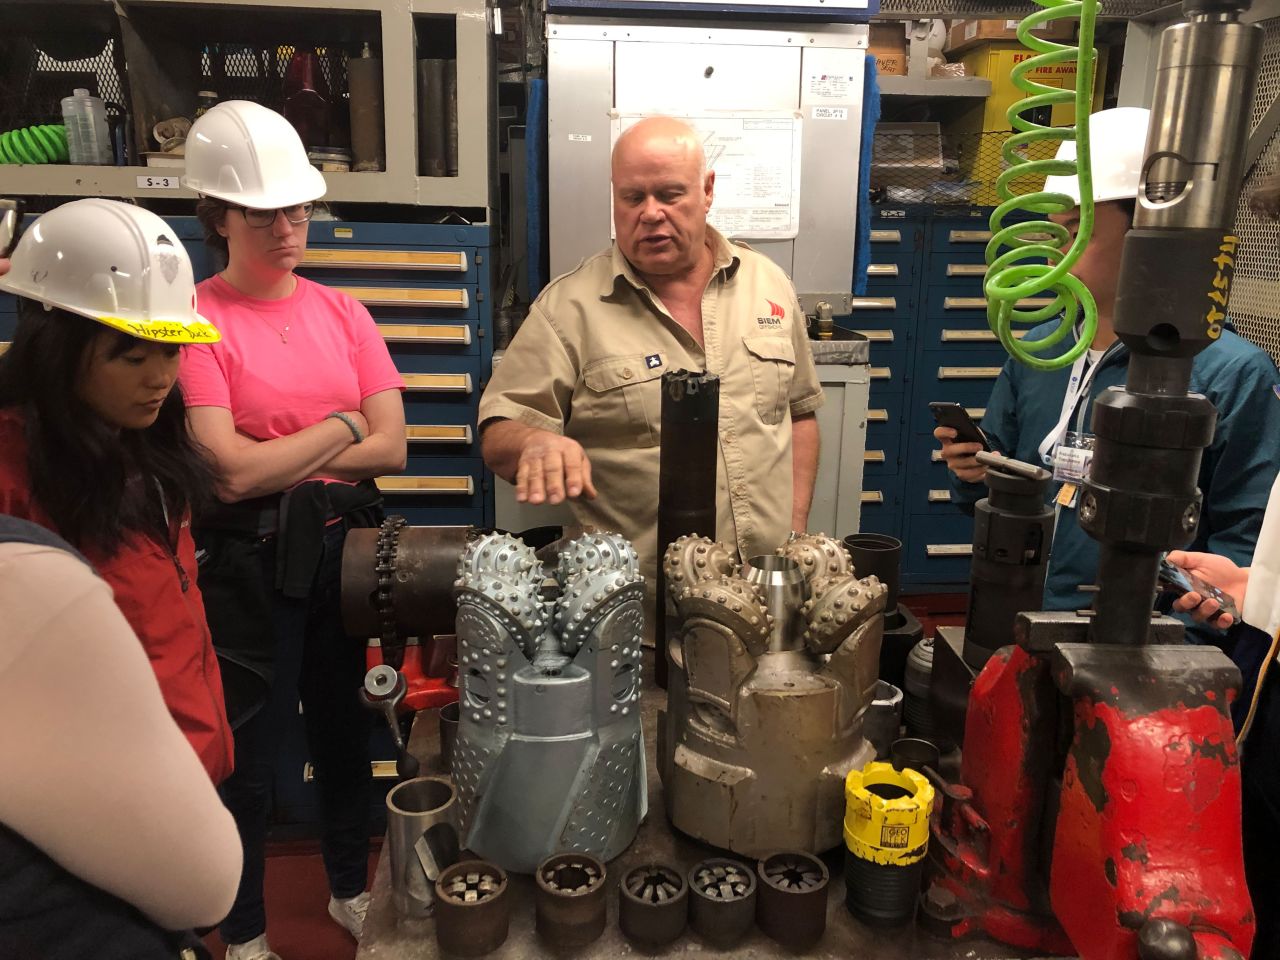 Scientists on Expedition 378 are briefed on the various drill bits used by the ship. The two larger drill bits are rotary, cutting a donut shape. Some are made of carbon steel while others are impregnated with diamonds, said Brad Clement, director of science services at the IODP.